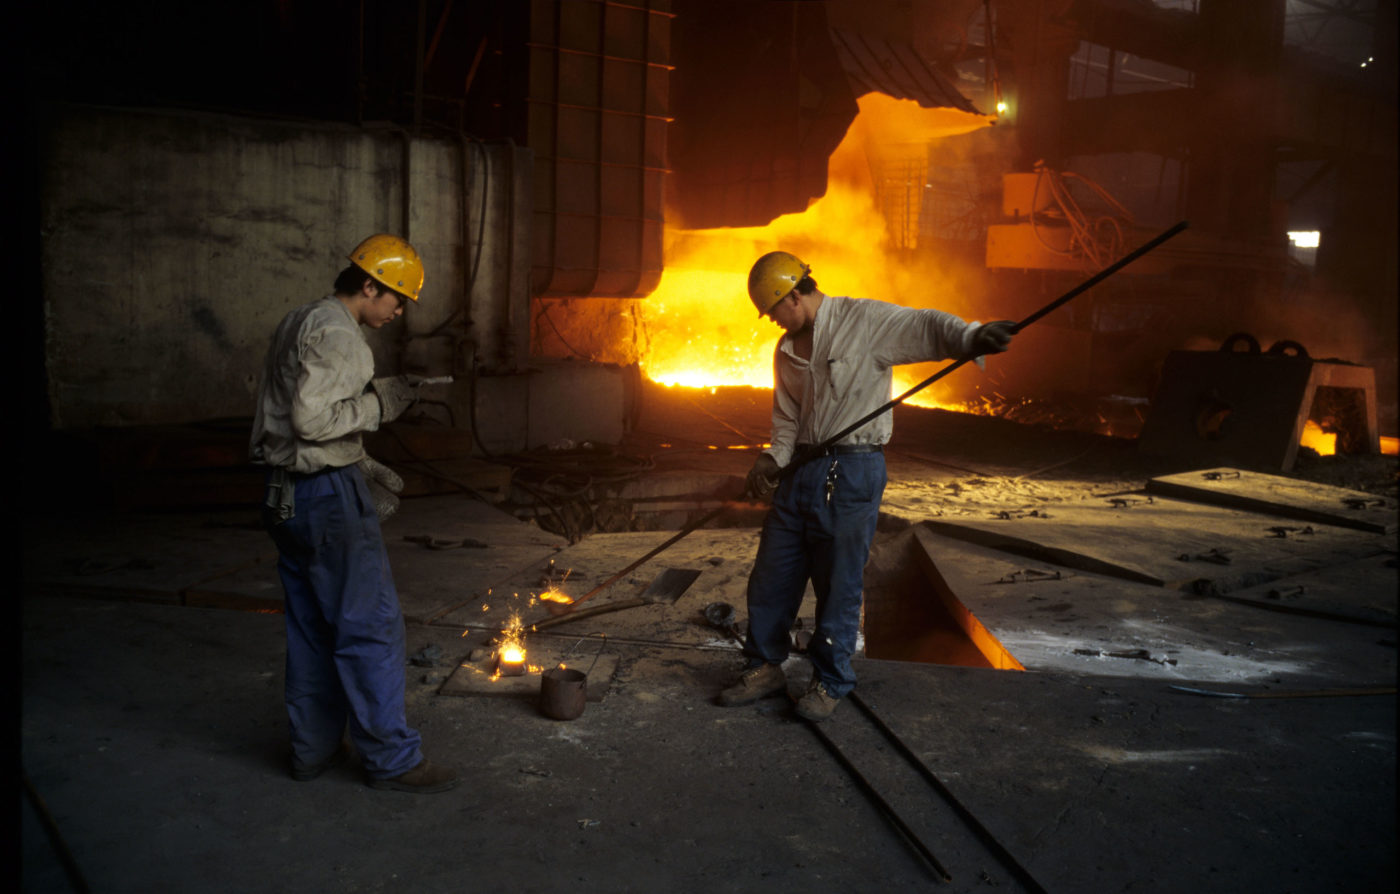 China’s crucial role in decarbonising the global steel sector